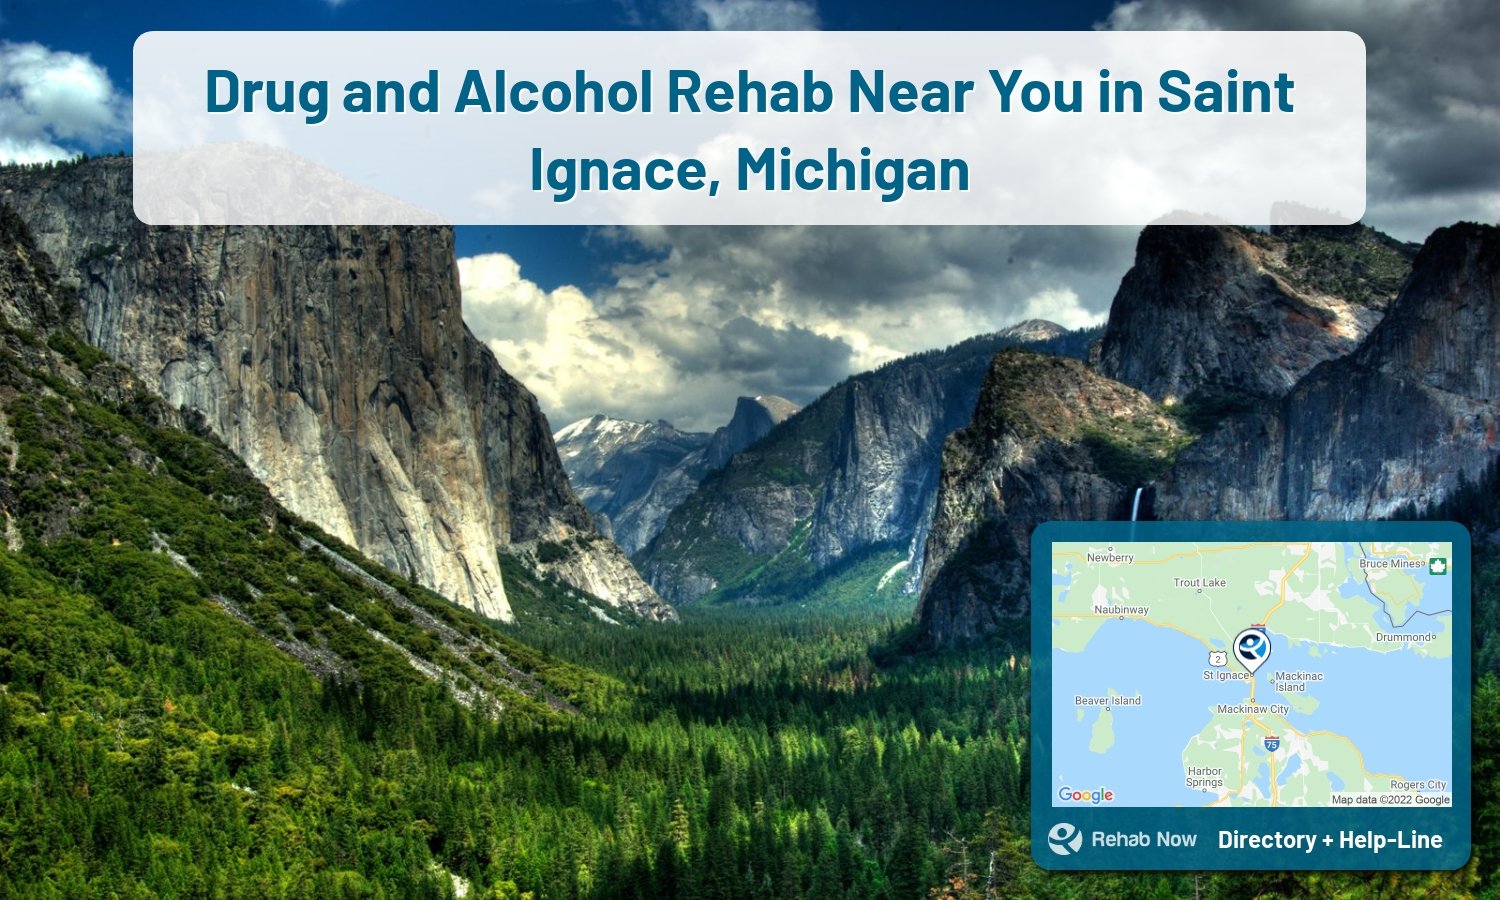 Saint Ignace, MI Treatment Centers. Find drug rehab in Saint Ignace, Michigan, or detox and treatment programs. Get the right help now!